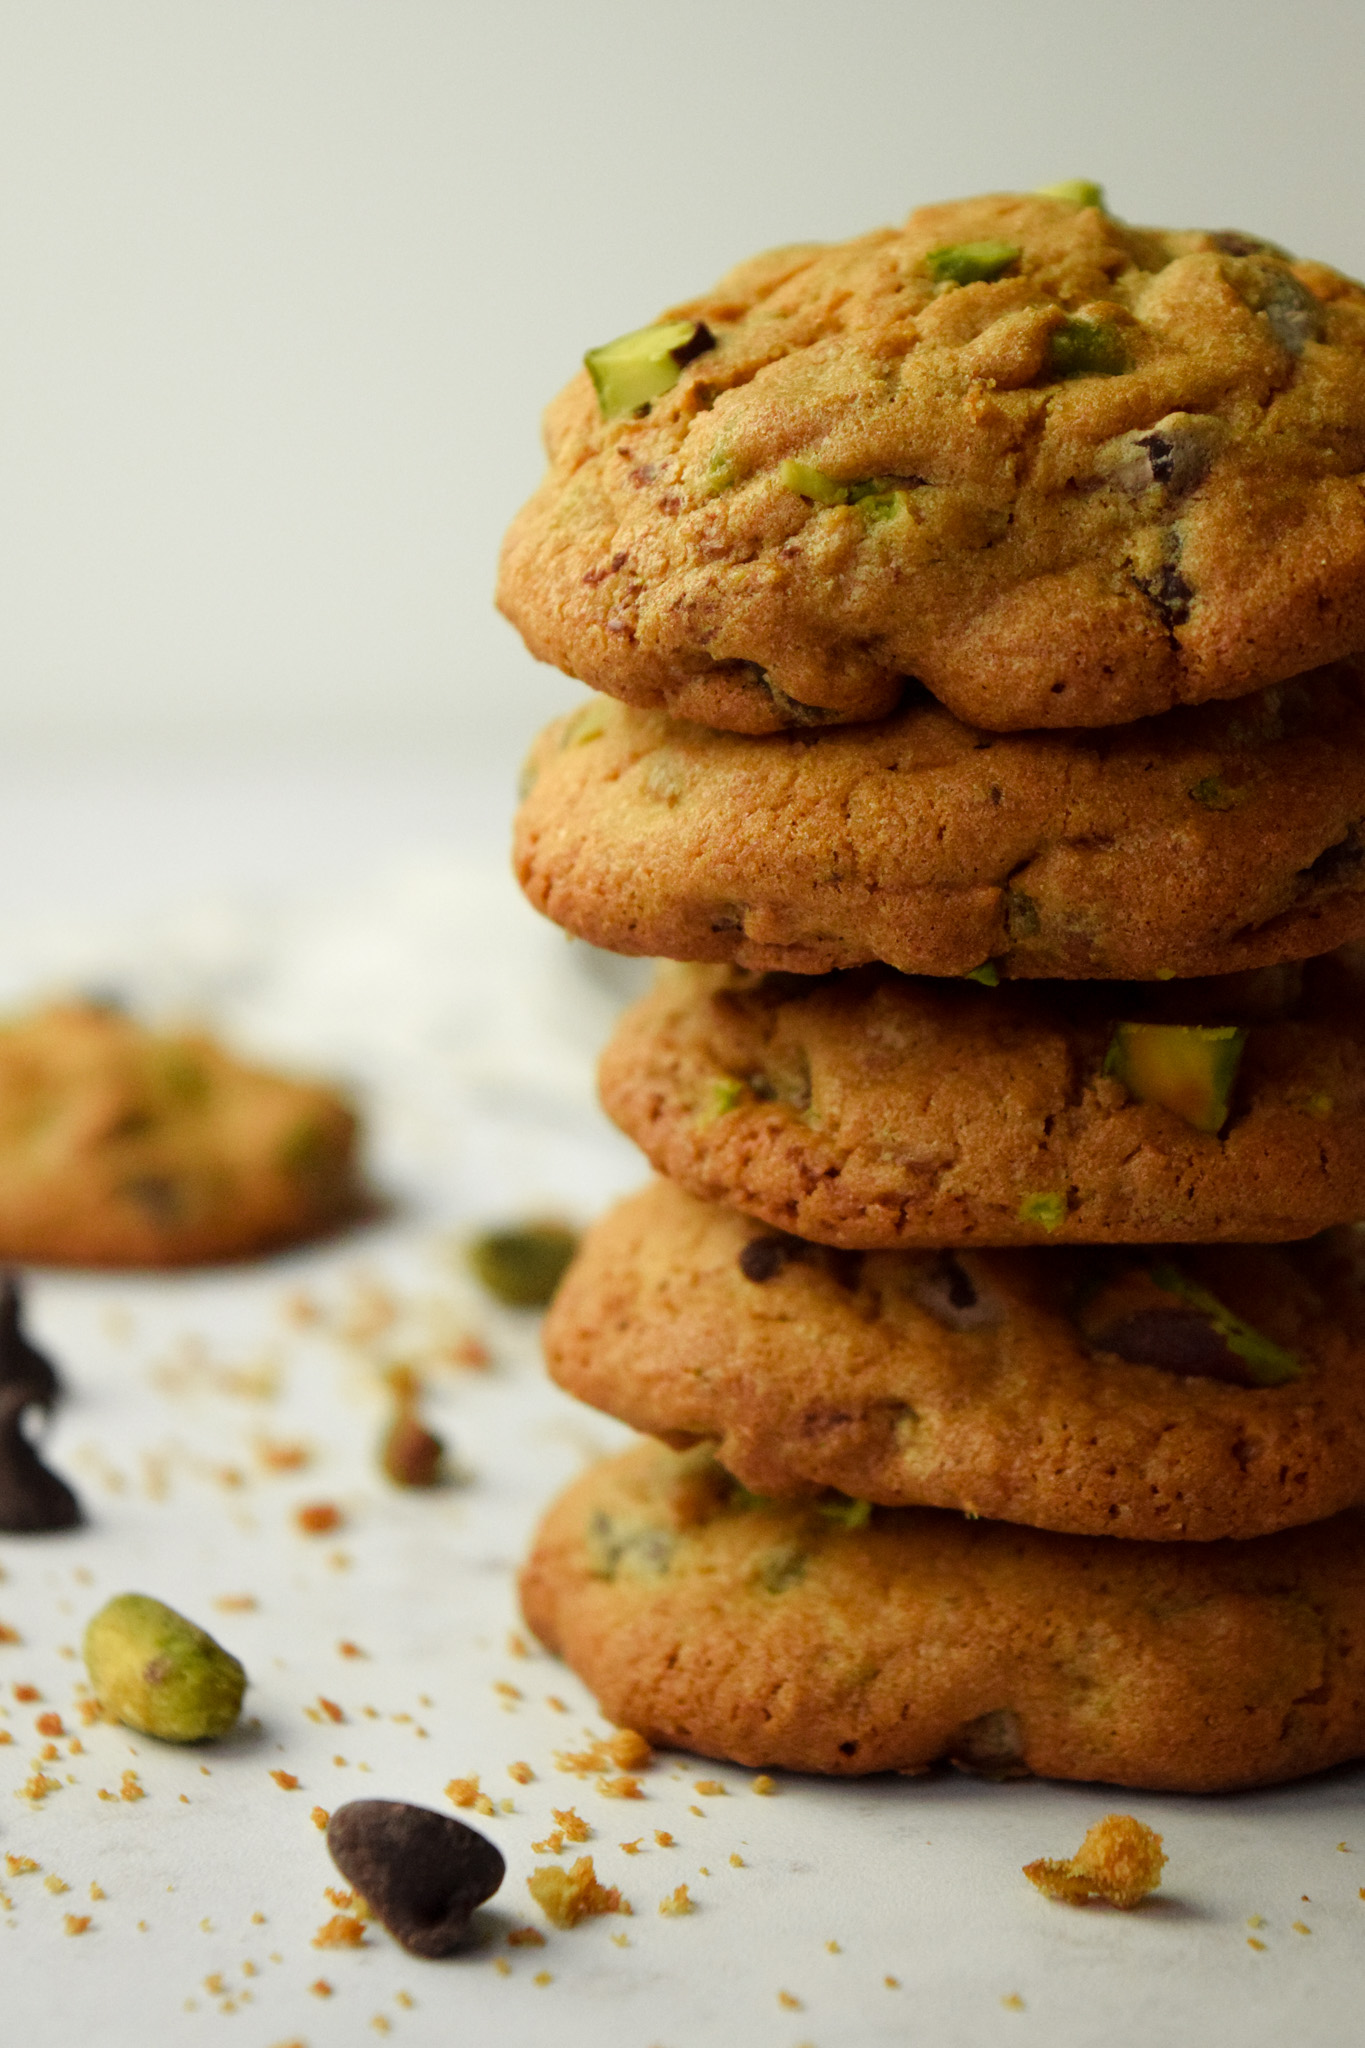 Stack of Gluten Free Chocolate Chip Cookies with Chopped Pistachios